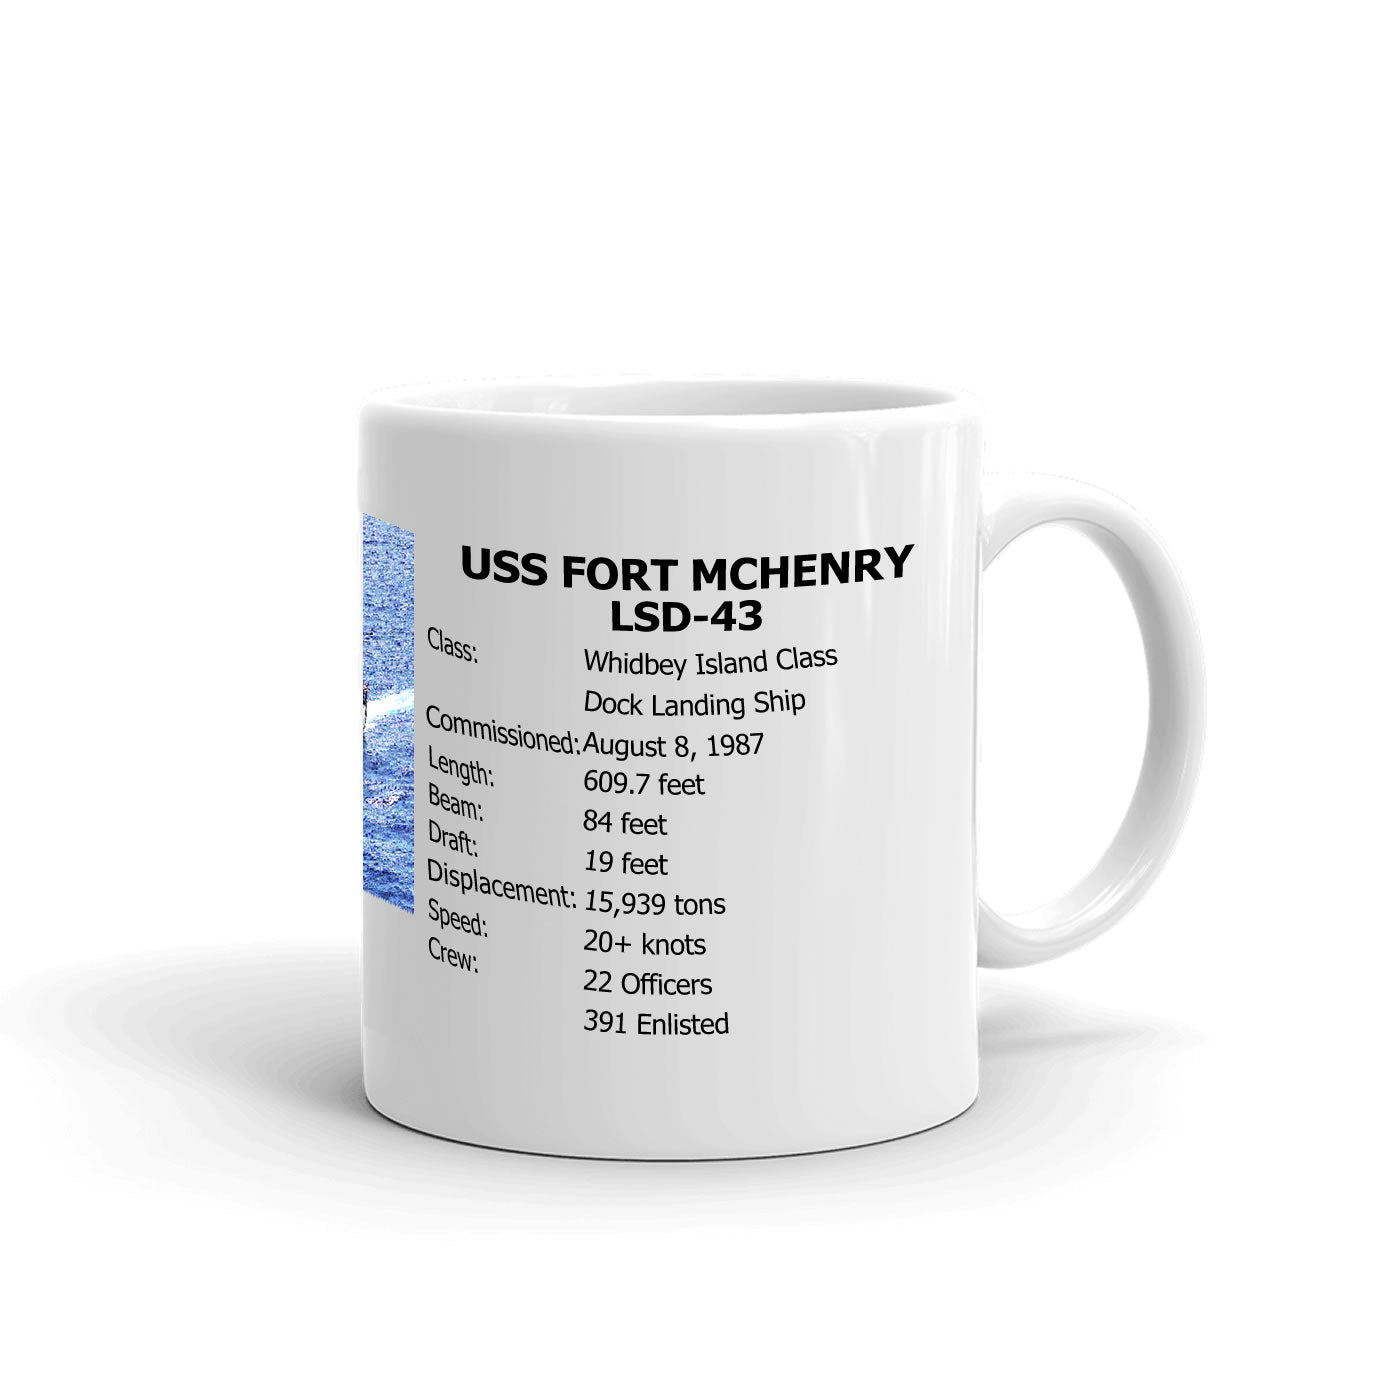 USS Fort Mchenry LSD-43 Coffee Cup Mug Right Handle